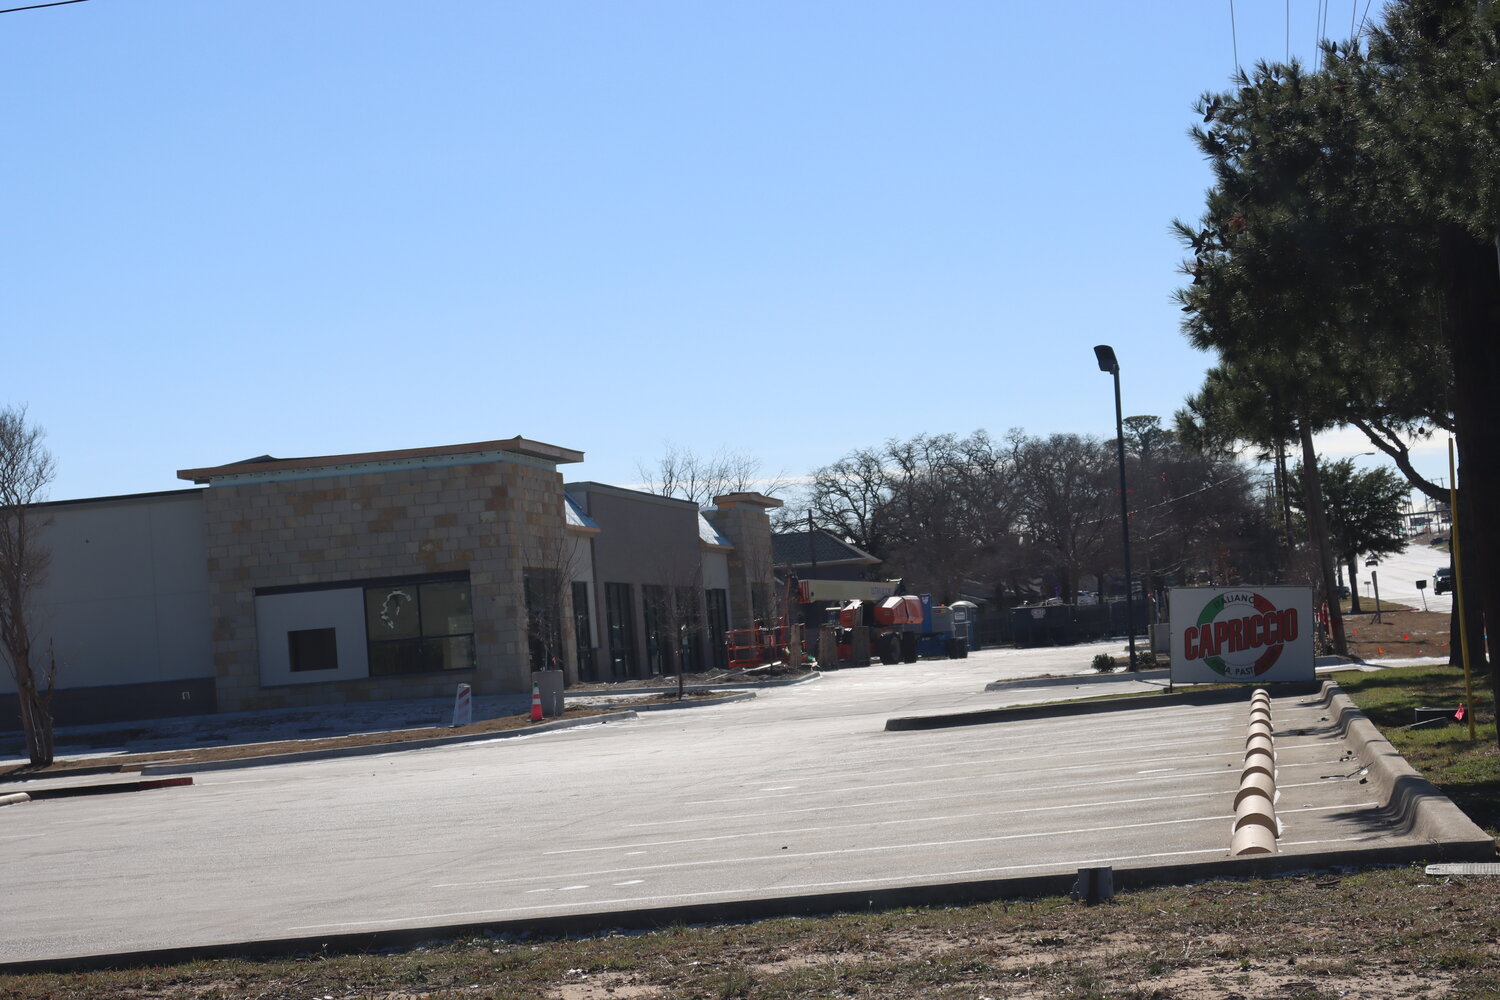 Hornet Plaza, next to Italiano’s Capriccio, will house at least three of the many new businesses set to open in Azle in the coming months.